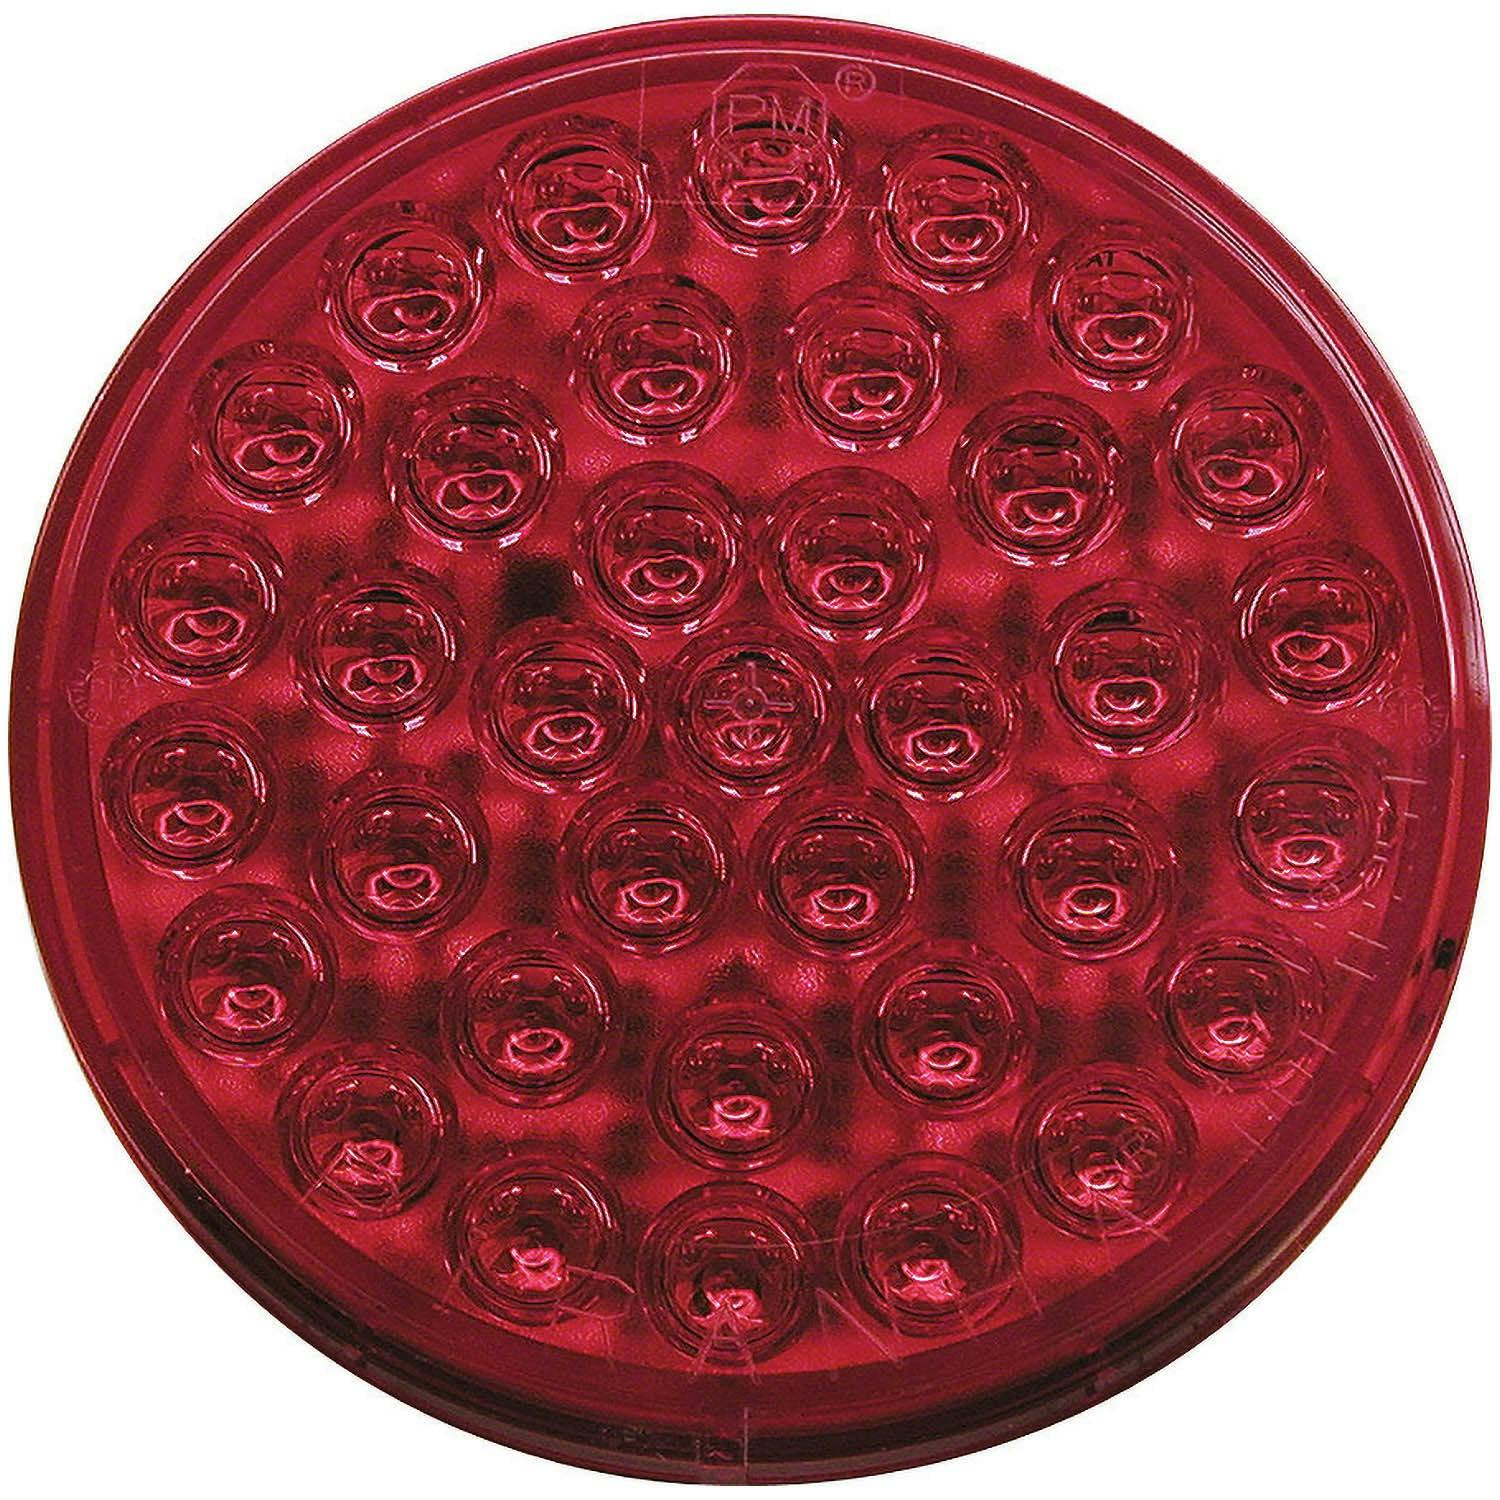 LED Stop/Turn/Tail, Round, 36 Diode AMP Housing Grommet-Mount 4", red (Pack of 6) - M417R